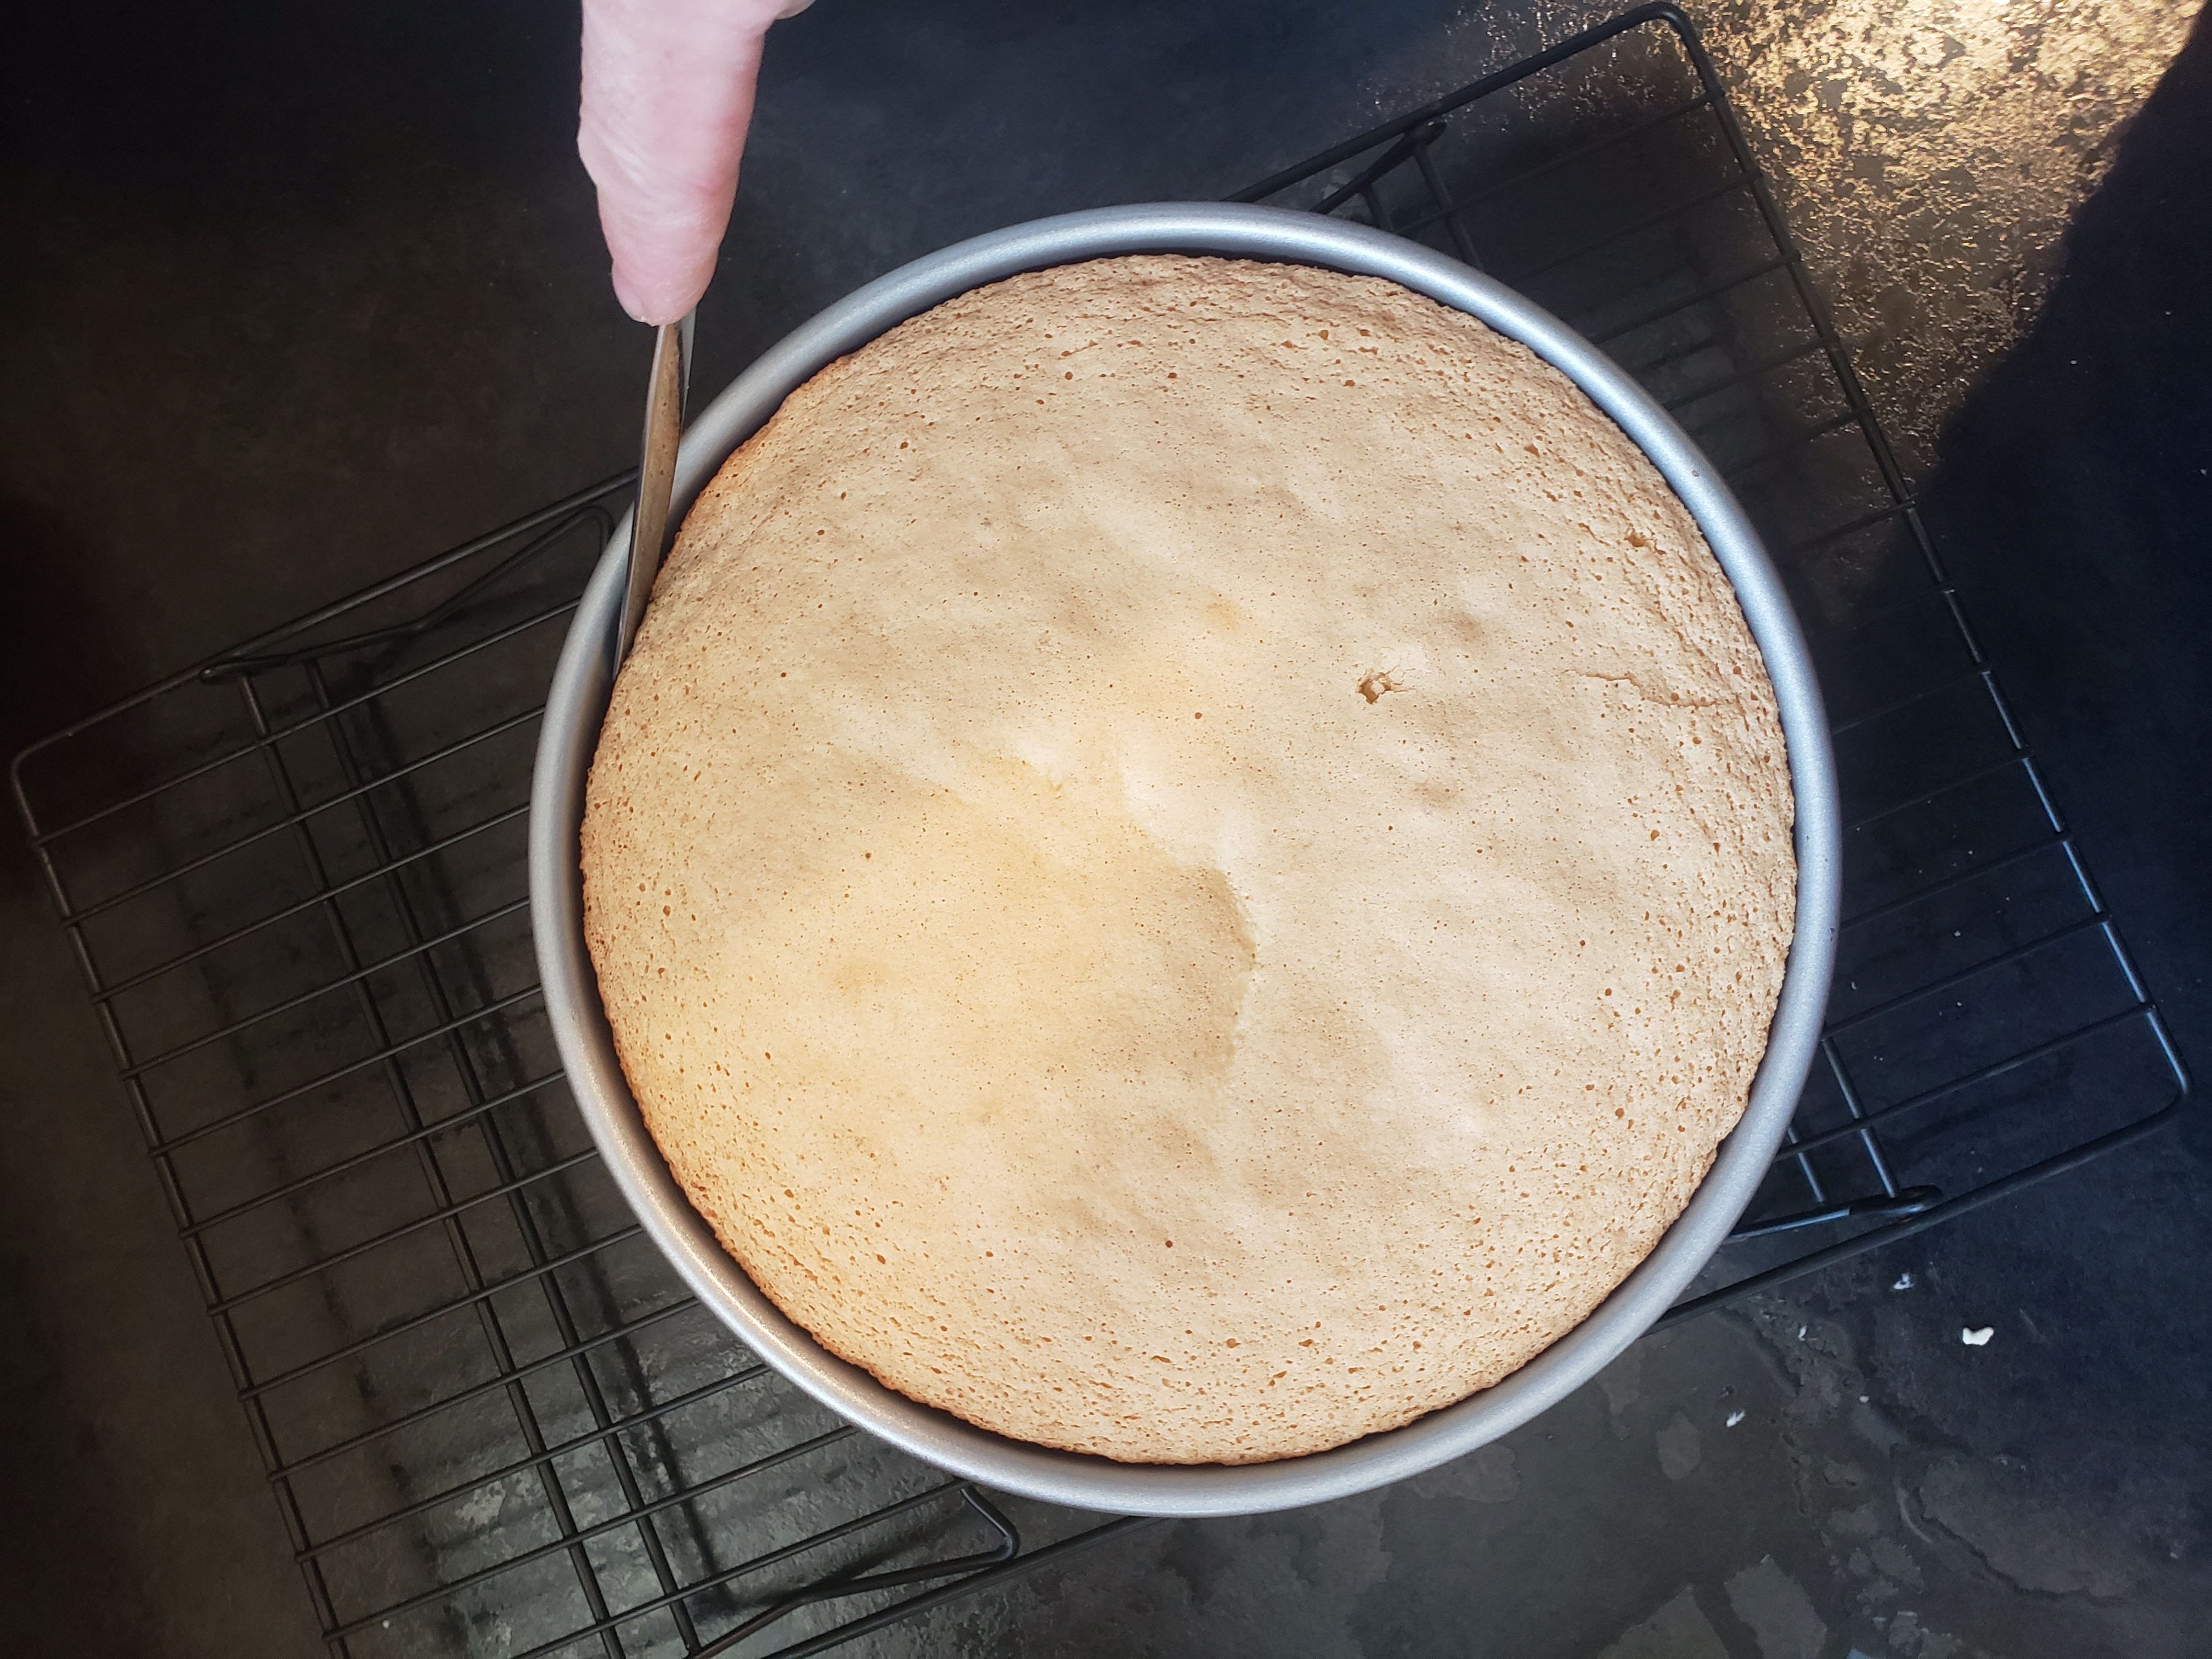 scoring the edges of a cake in a pan